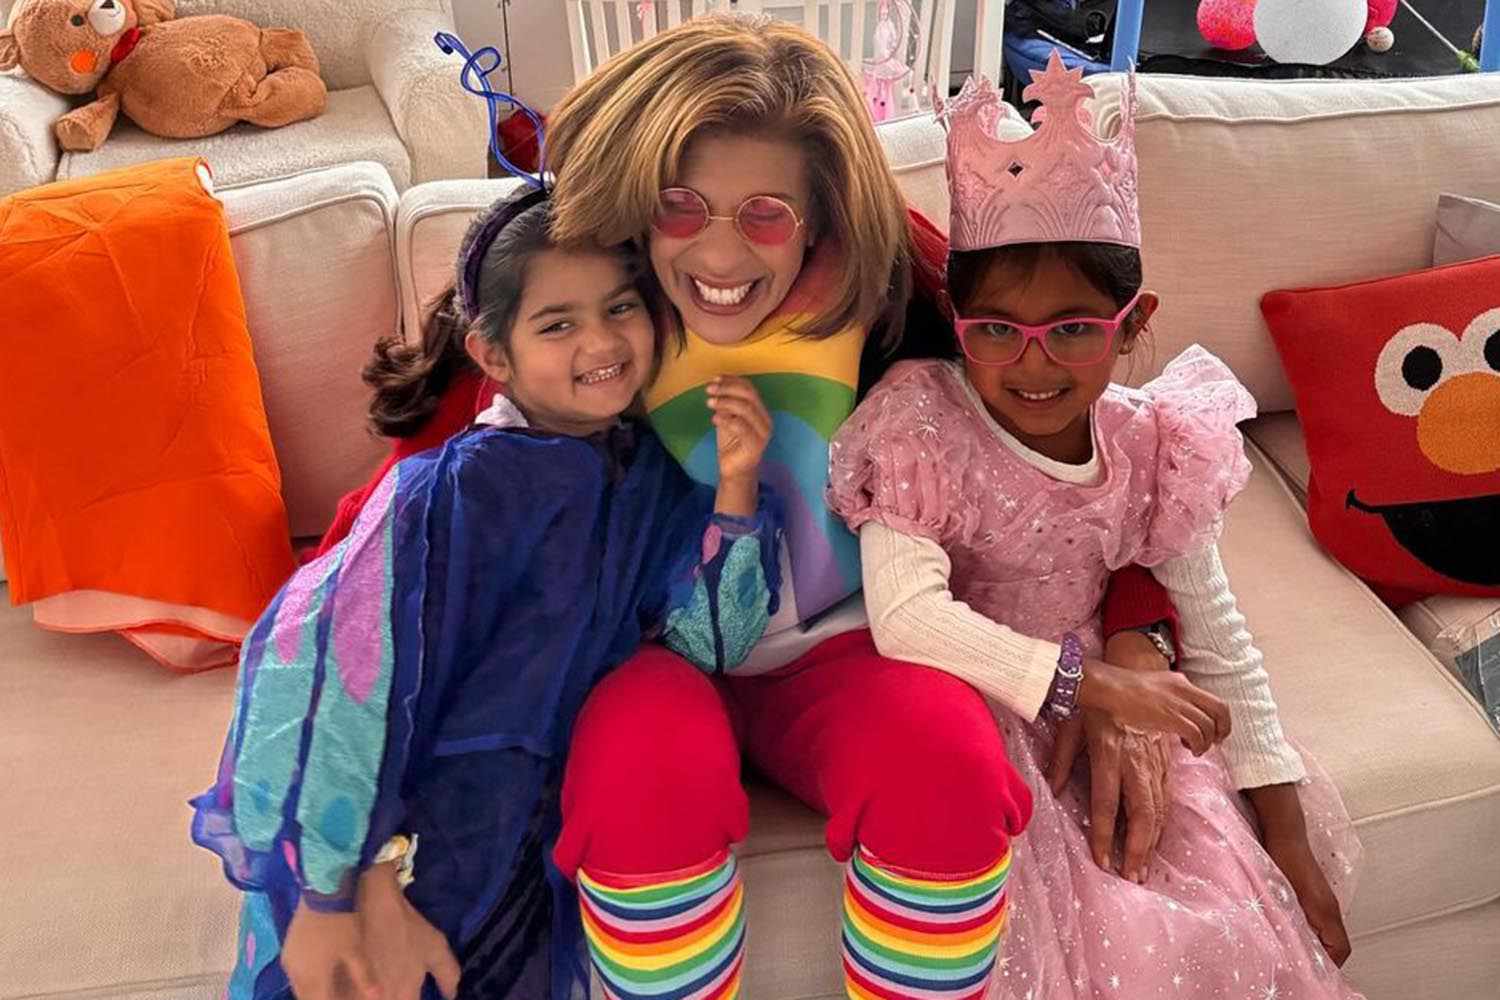 Hoda Kotb Reveals She Was 'So Happy' Locking Bedroom, Leaving Kids with Babysitter: 'Mama's Done' (Exclusive)